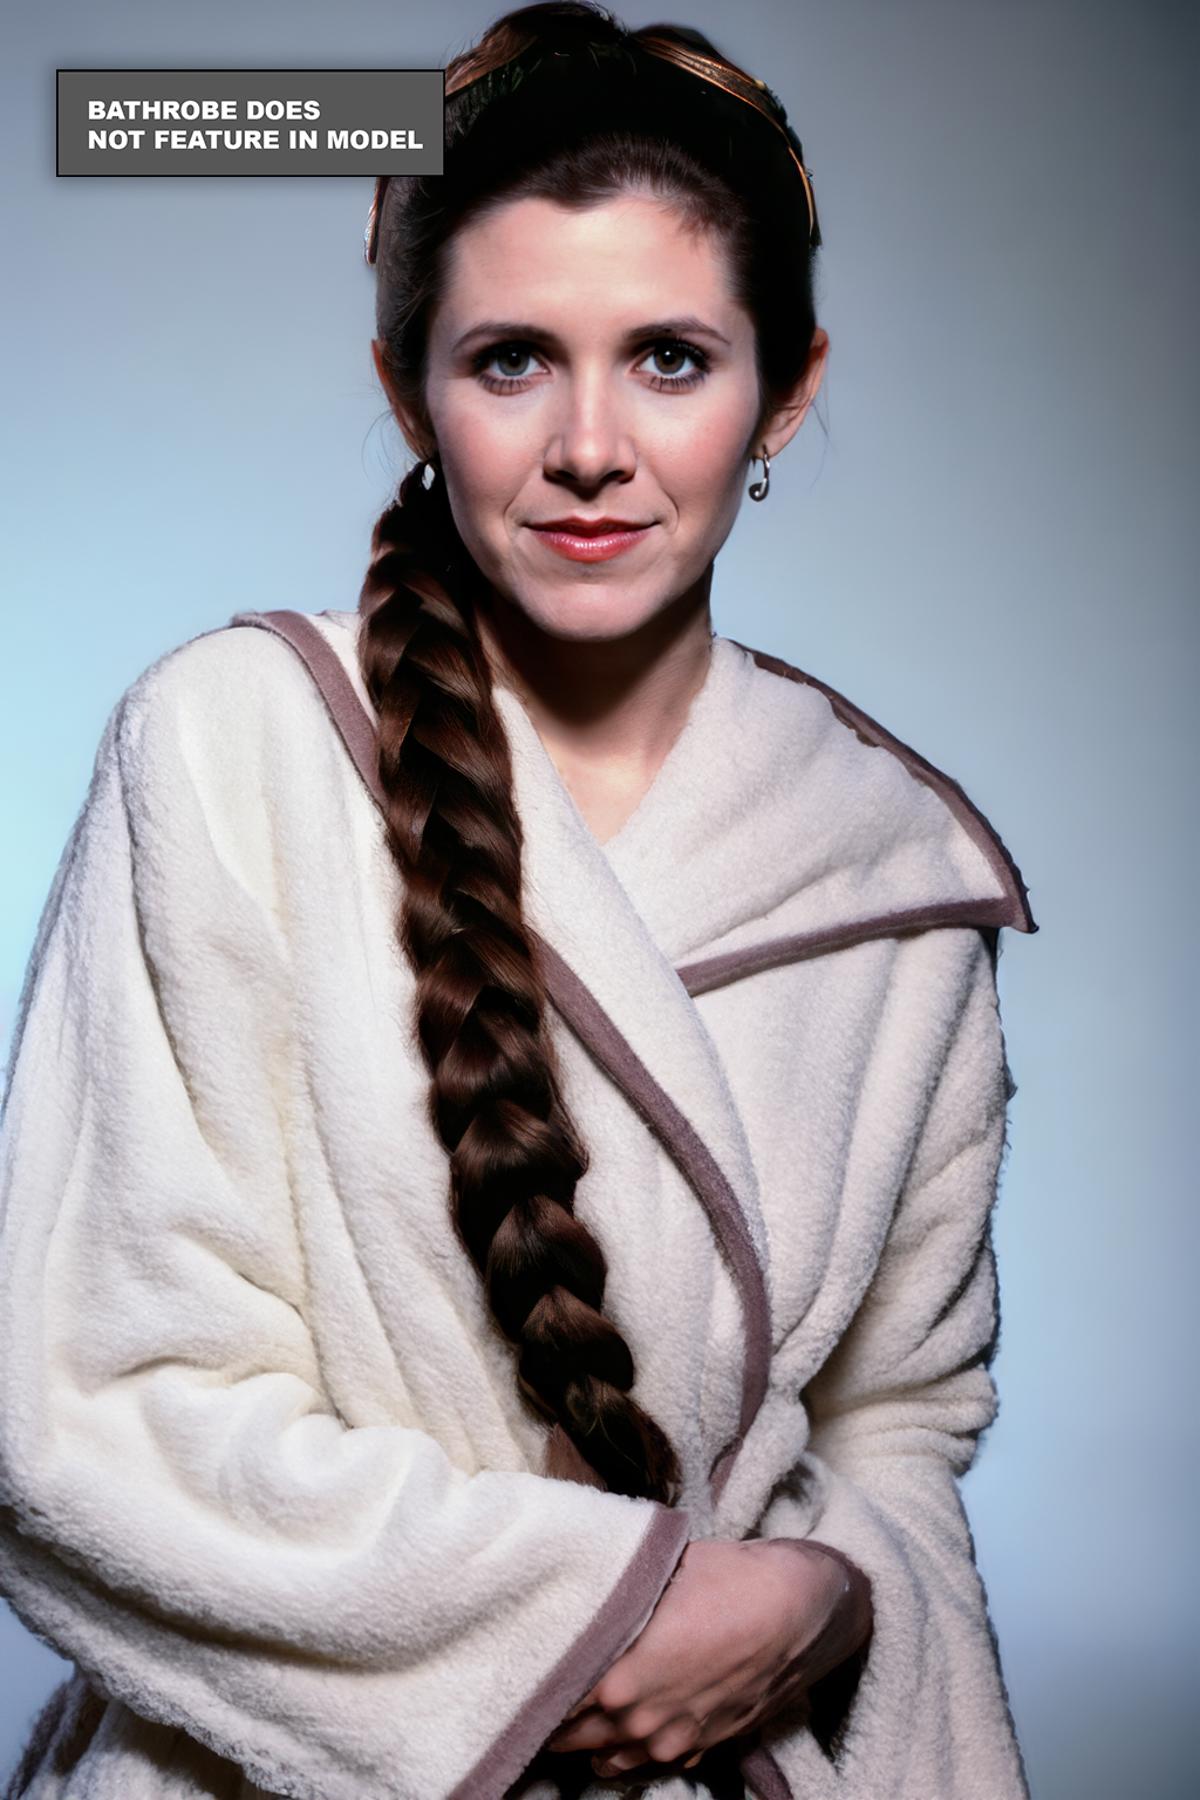 Slave Leia (Carrie Fisher in 'Return of the Jedi') image by VintageBeauty